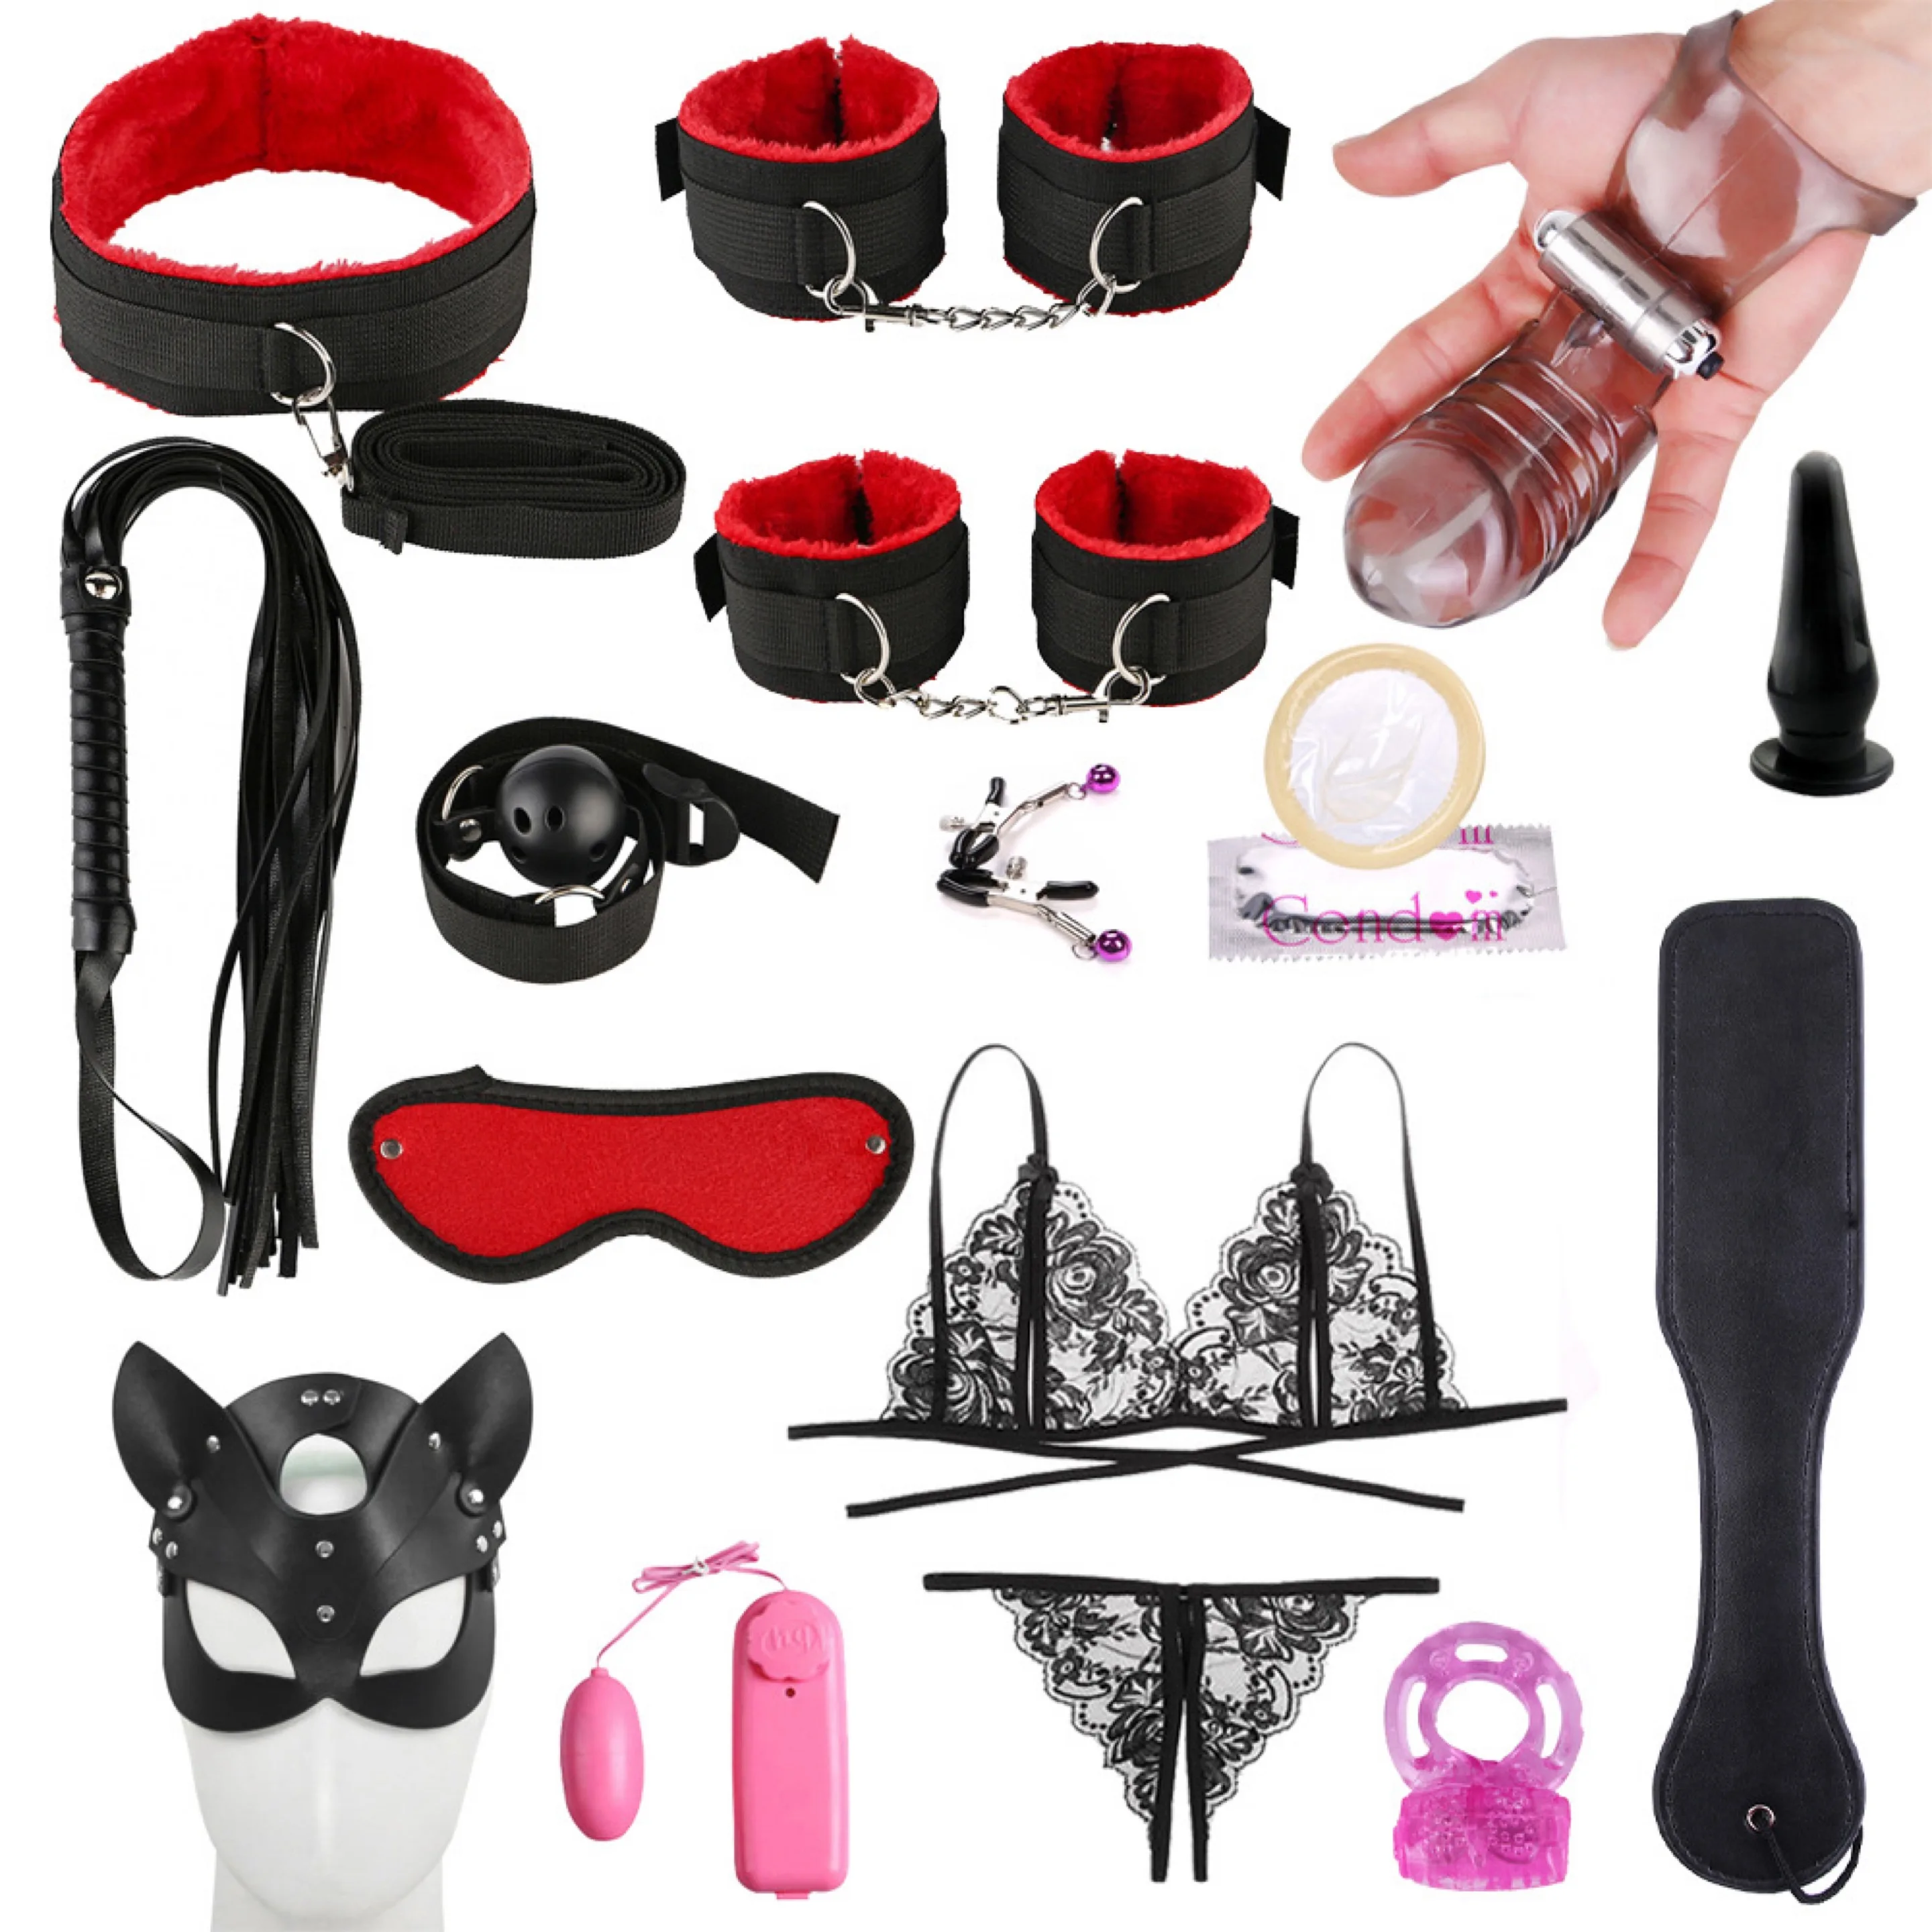 Wholesale 16pcs set Sex Toys Bondage gear sex toys for woman Handcuffs Whip anal plug husband and wife toys vibrators fetish sm Products From m.alibaba Sex Image Hq